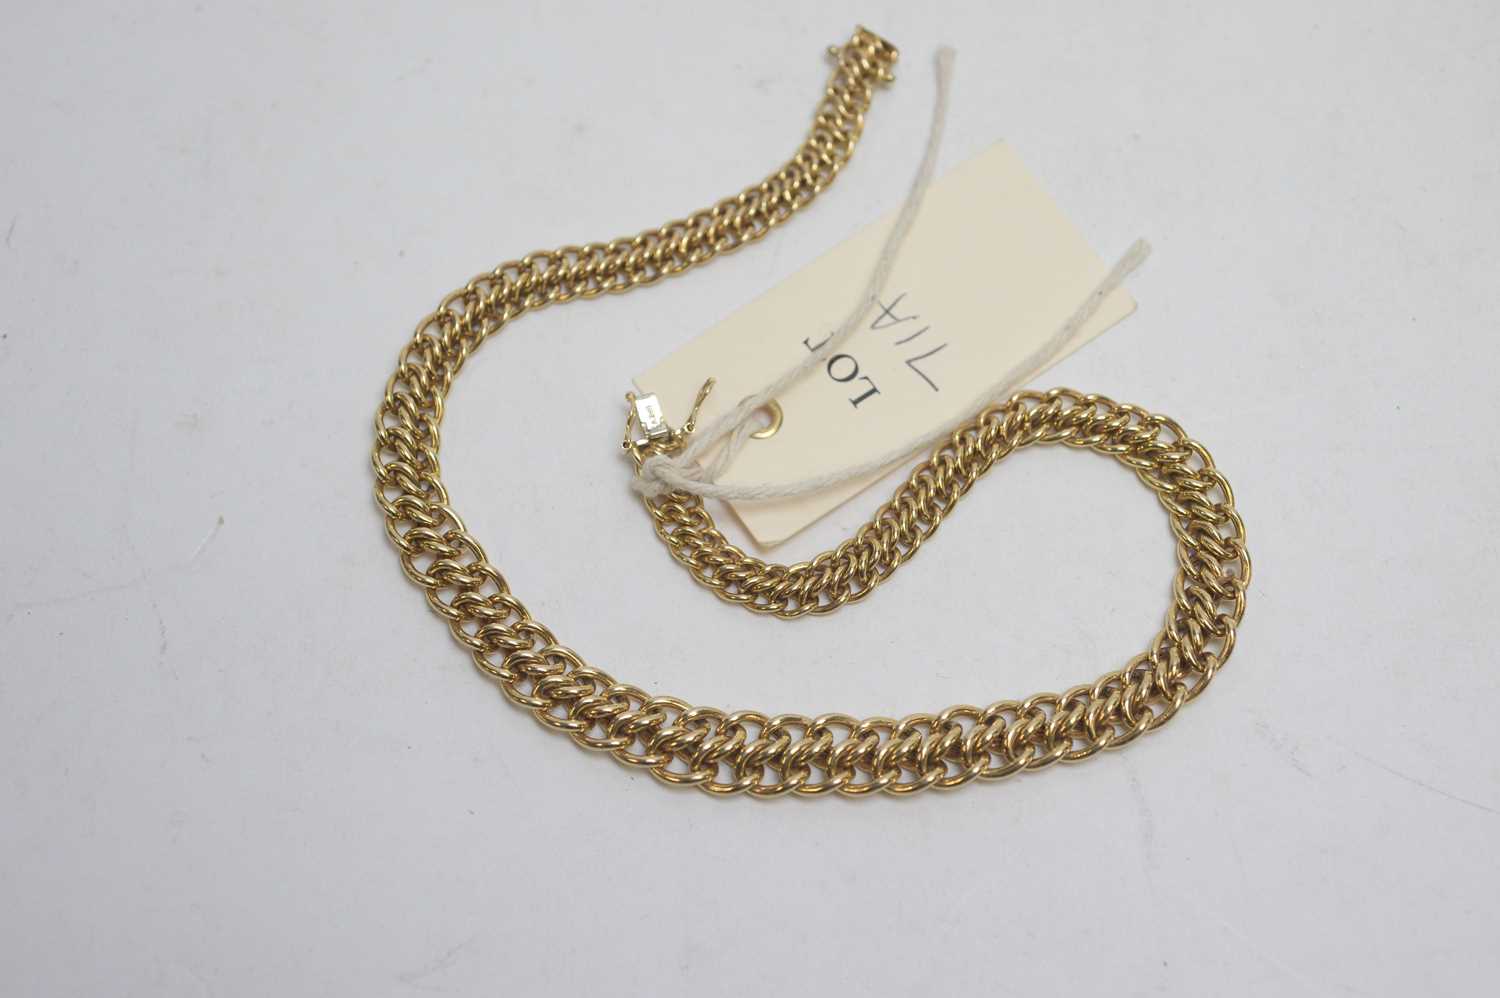 Lot 71 - 14ct. yellow gold necklace.